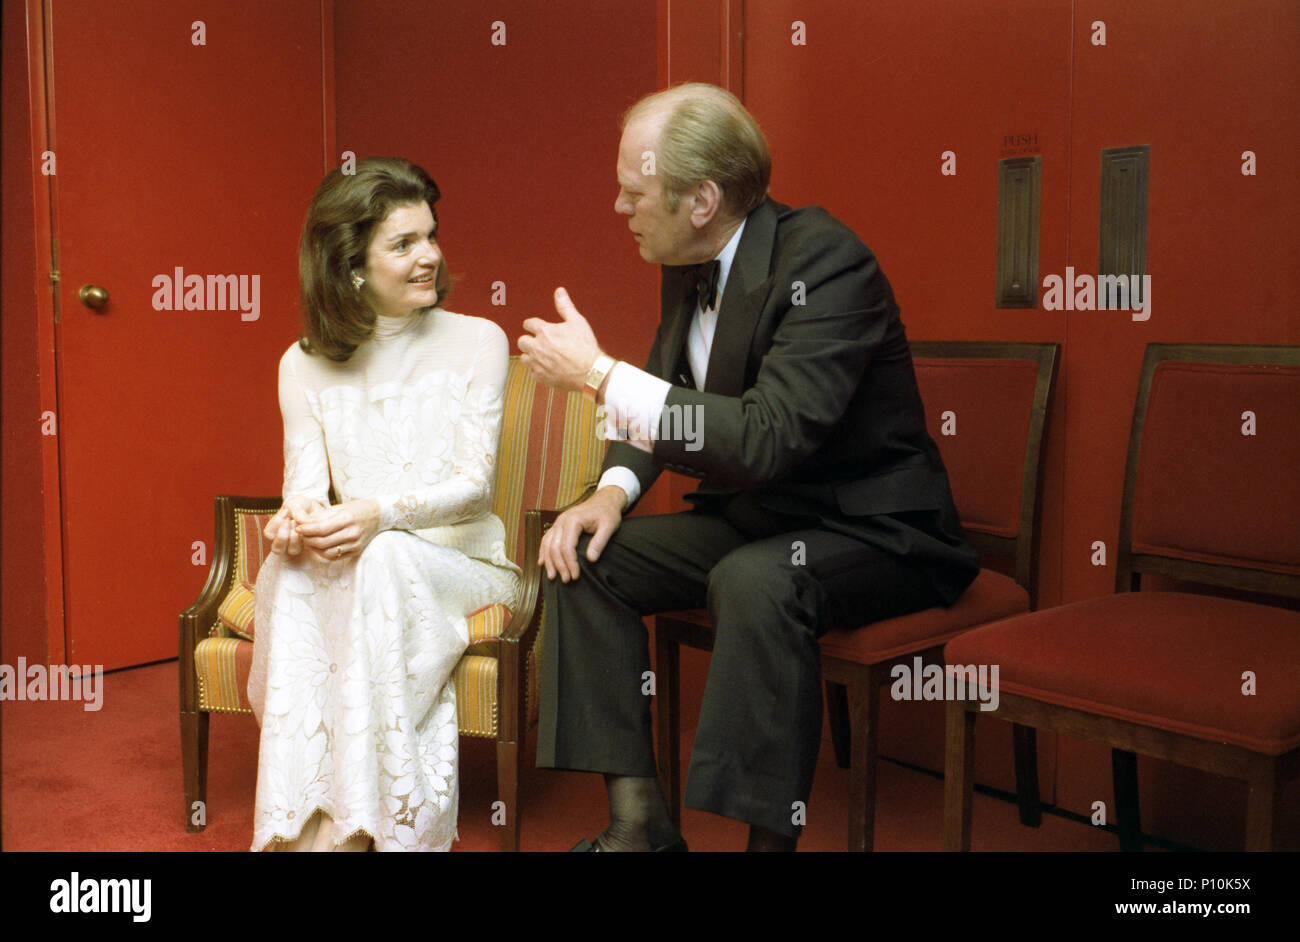 1976, January 25 – John F. Kennedy Center for the Performing Arts - African Room –  Gerald R. Ford, Jacqueline Bouvier Kennedy Onassis – seated, talking; formal wear – Bicentennial Salute to the Performing Arts - Intermission Reception; First Ladies Stock Photo